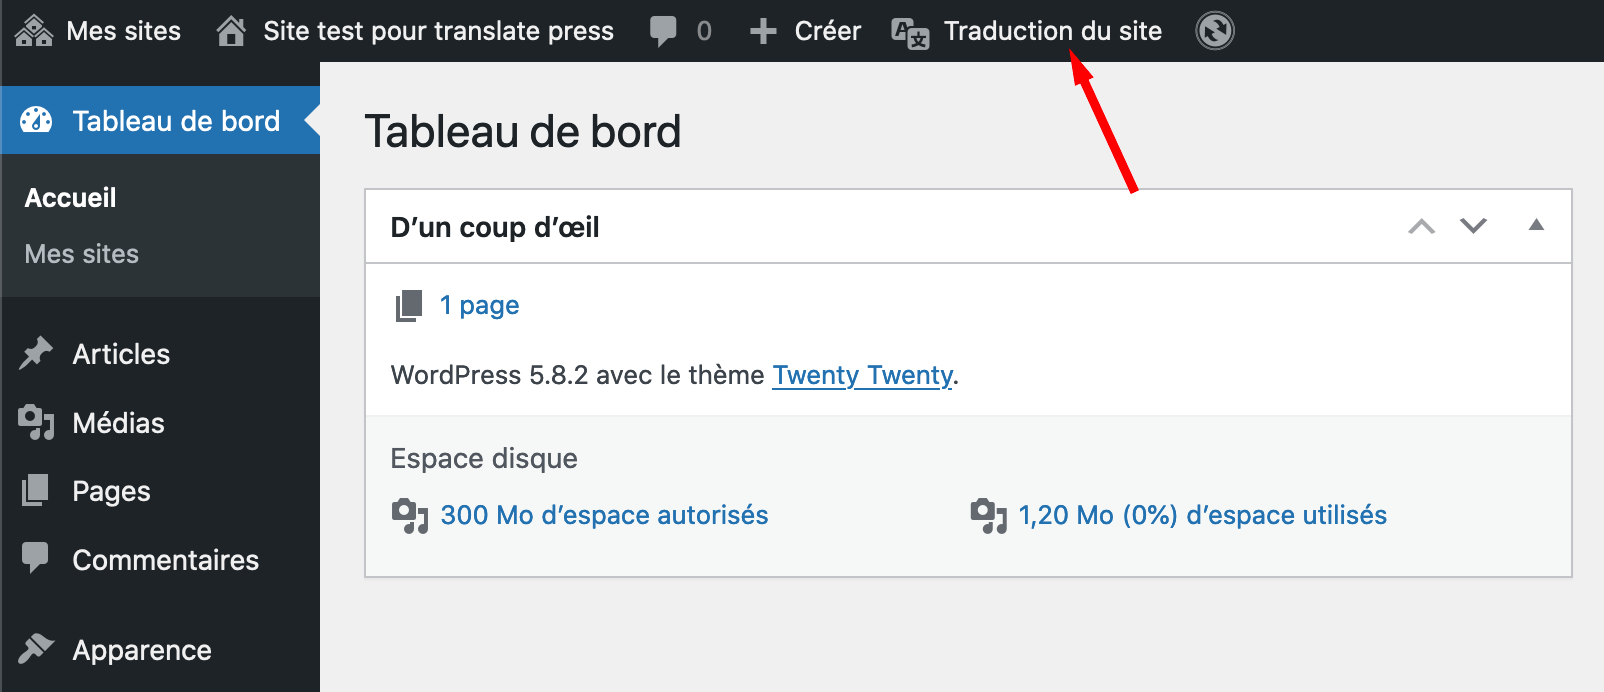 trp-access-traduction-from-dashboard.png